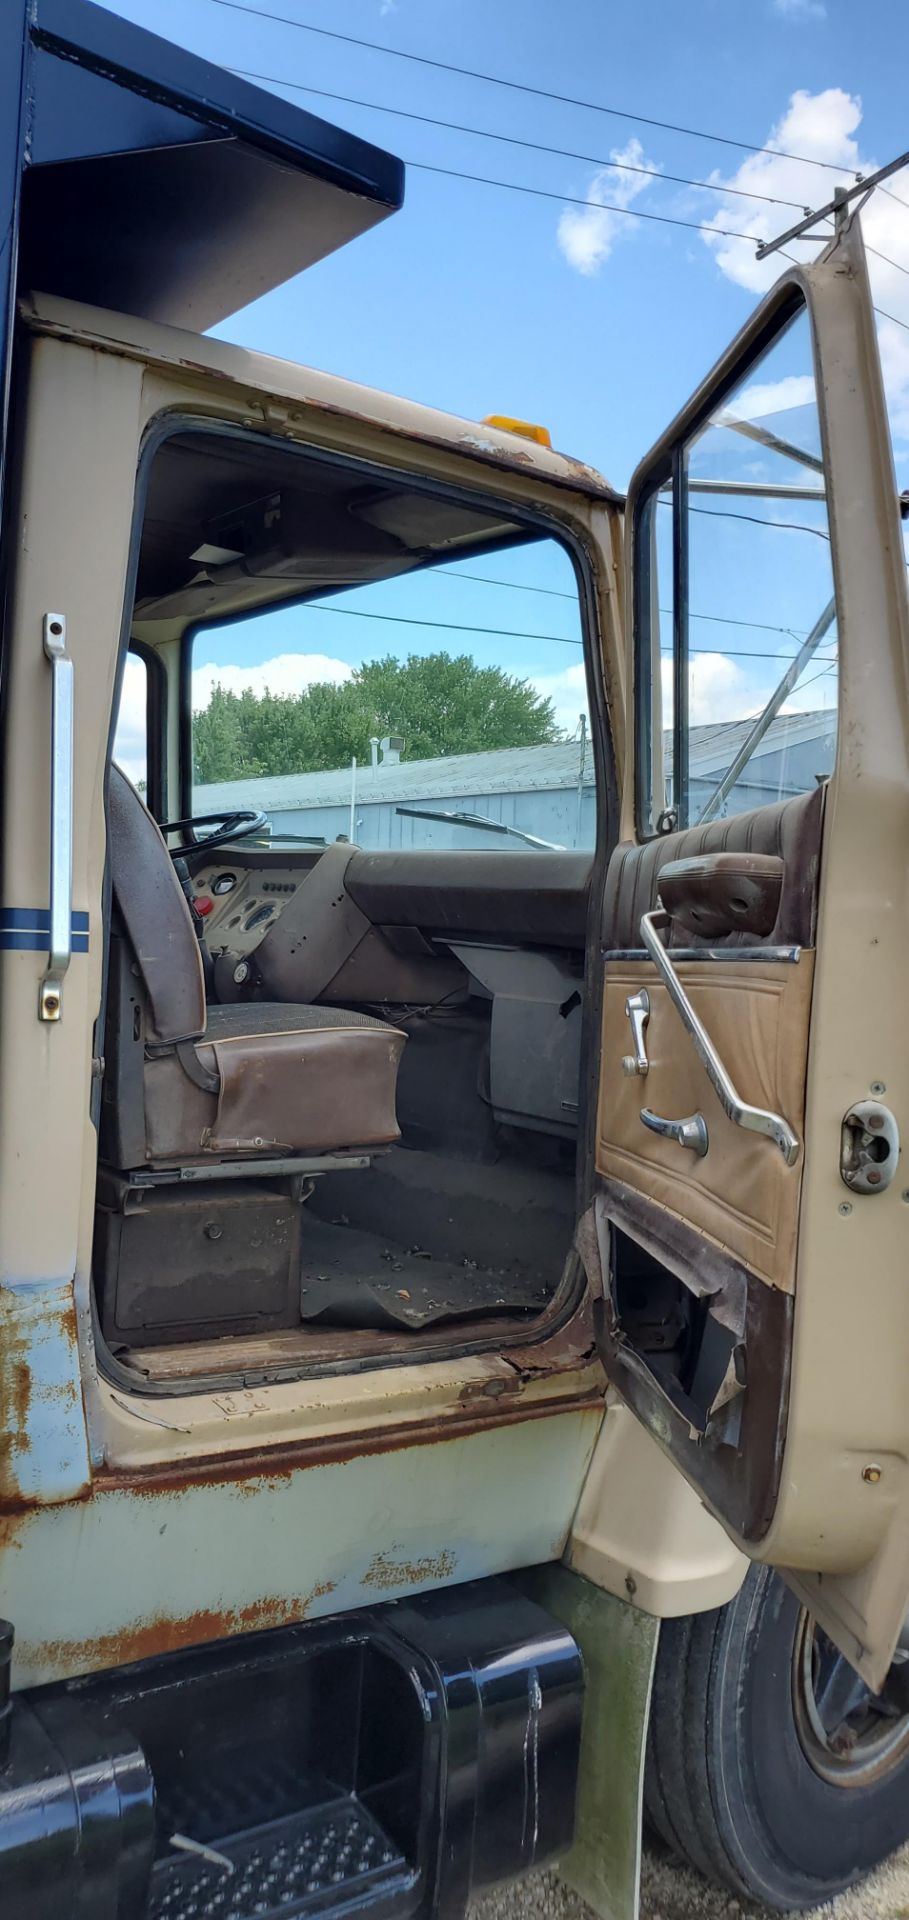 1983 Ford 7000, 5-speed Manual Transmission, Caterpillar 3208 Diesel, 14" Dump Bed,UR 225 Tires, New - Image 9 of 25